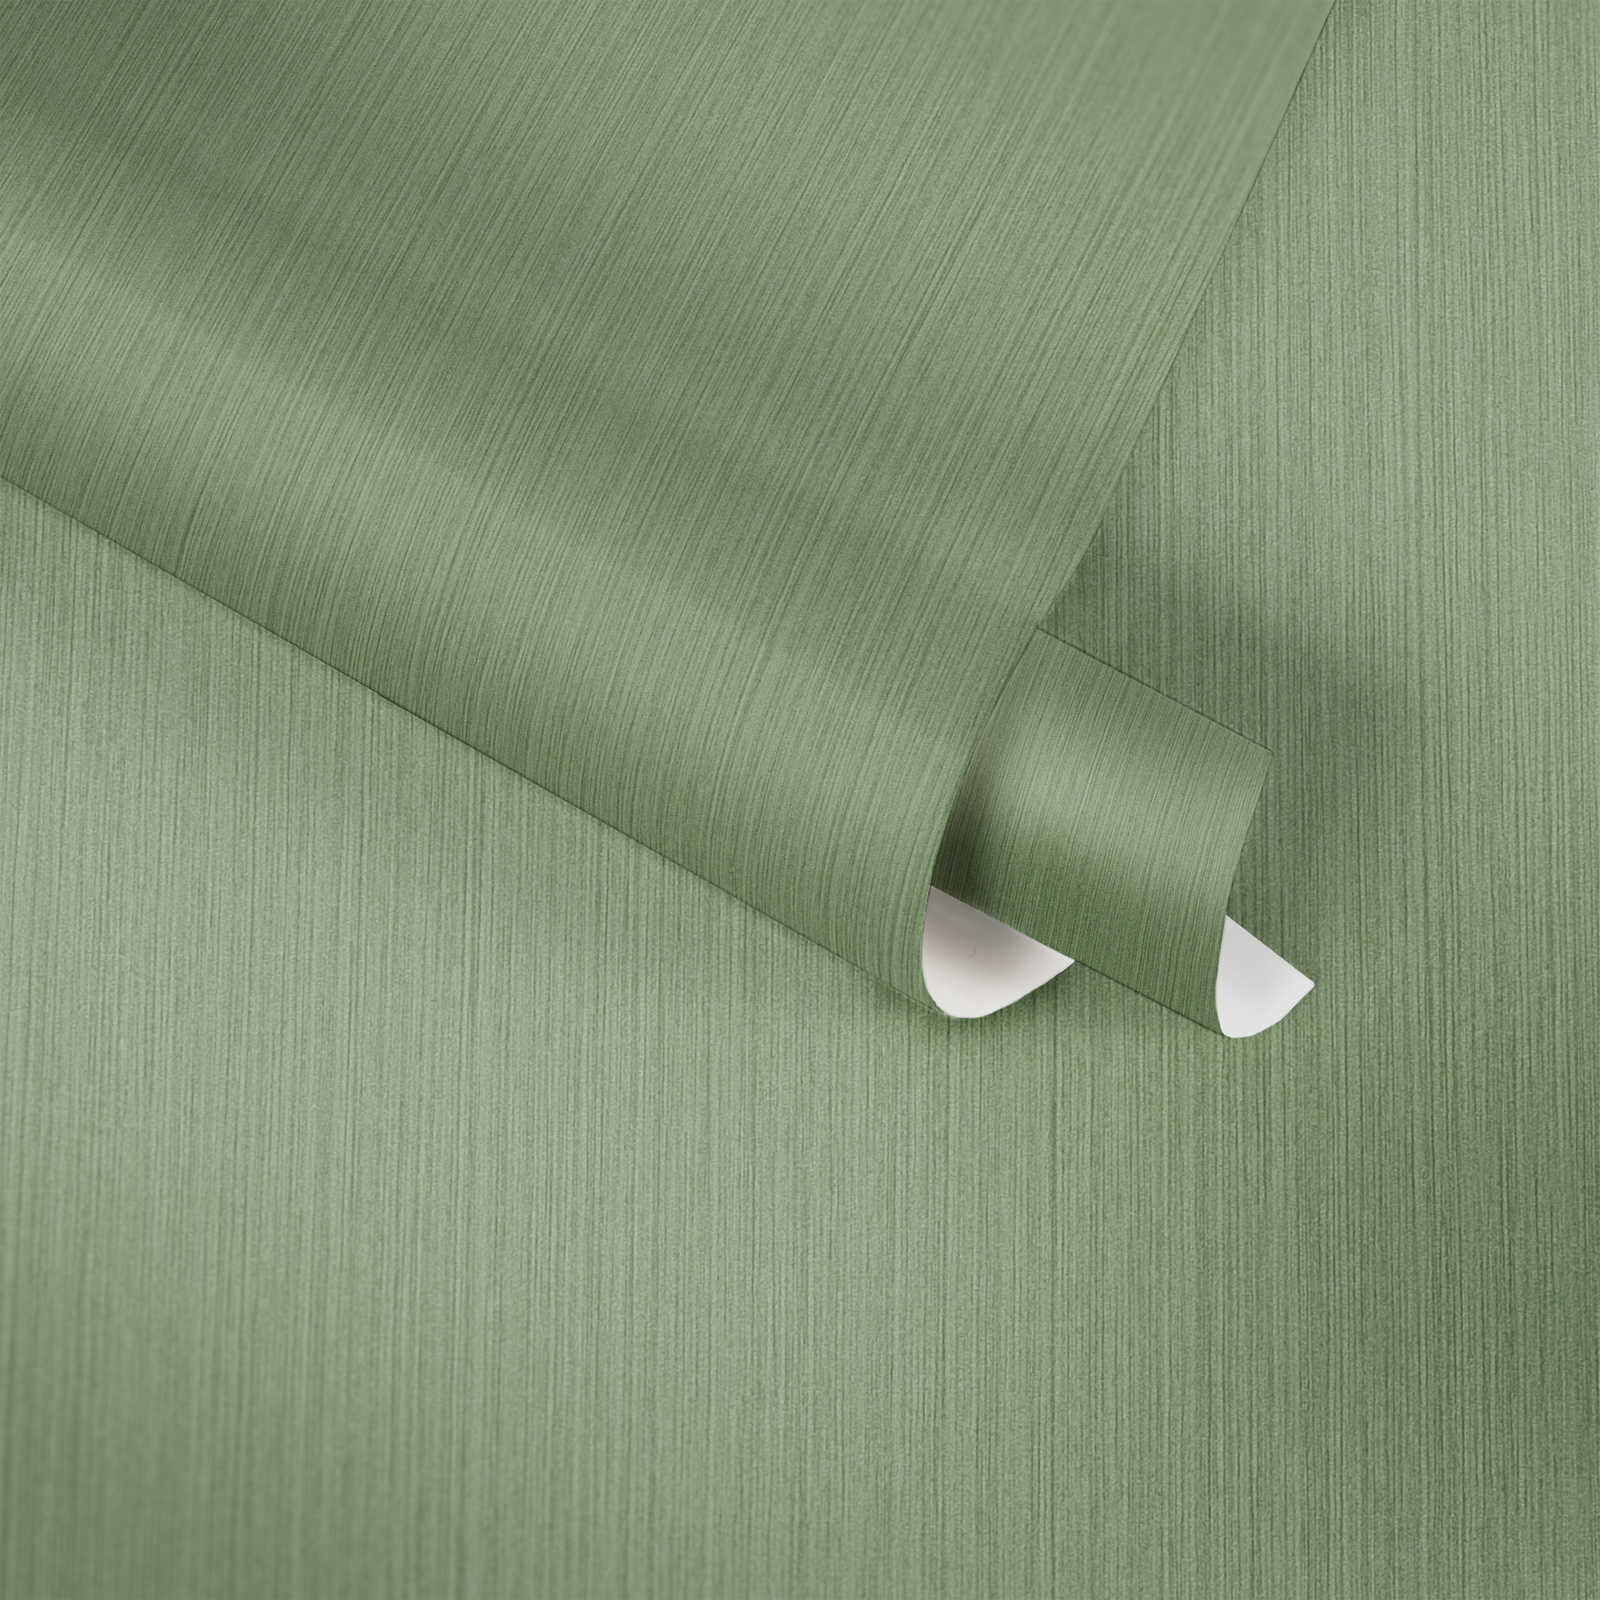             Plain wallpaper green with mottled textile effect from MICHALSKY
        